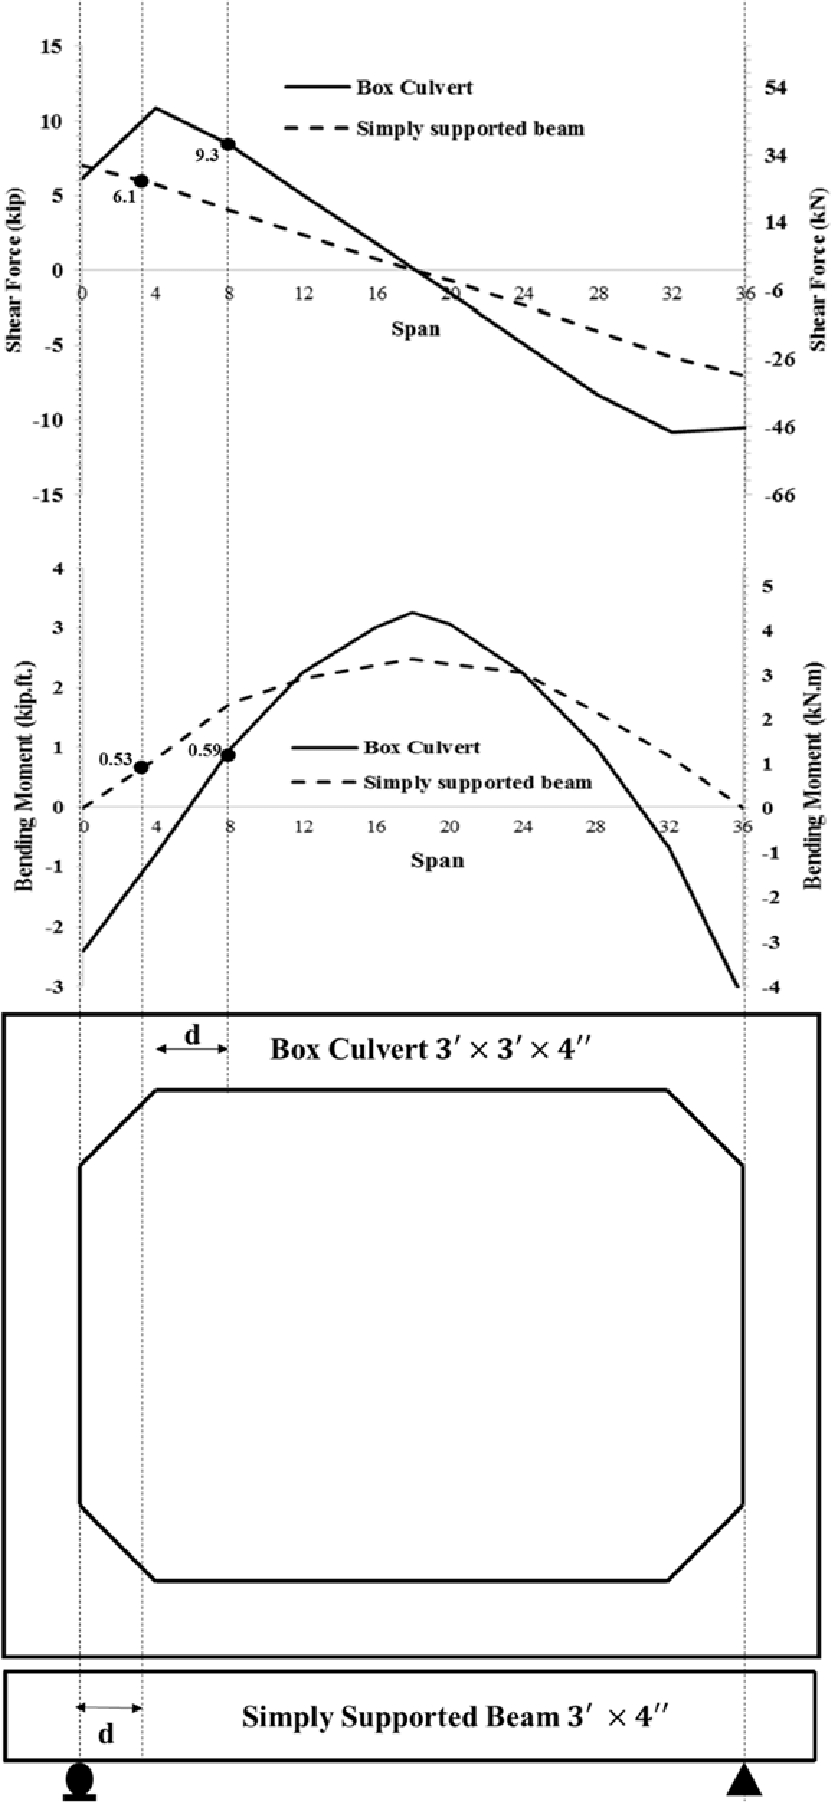 Shear Moment Diagram Shear Force And Bending Moment Diagrams For Box Culvert 3 3 3 3 4